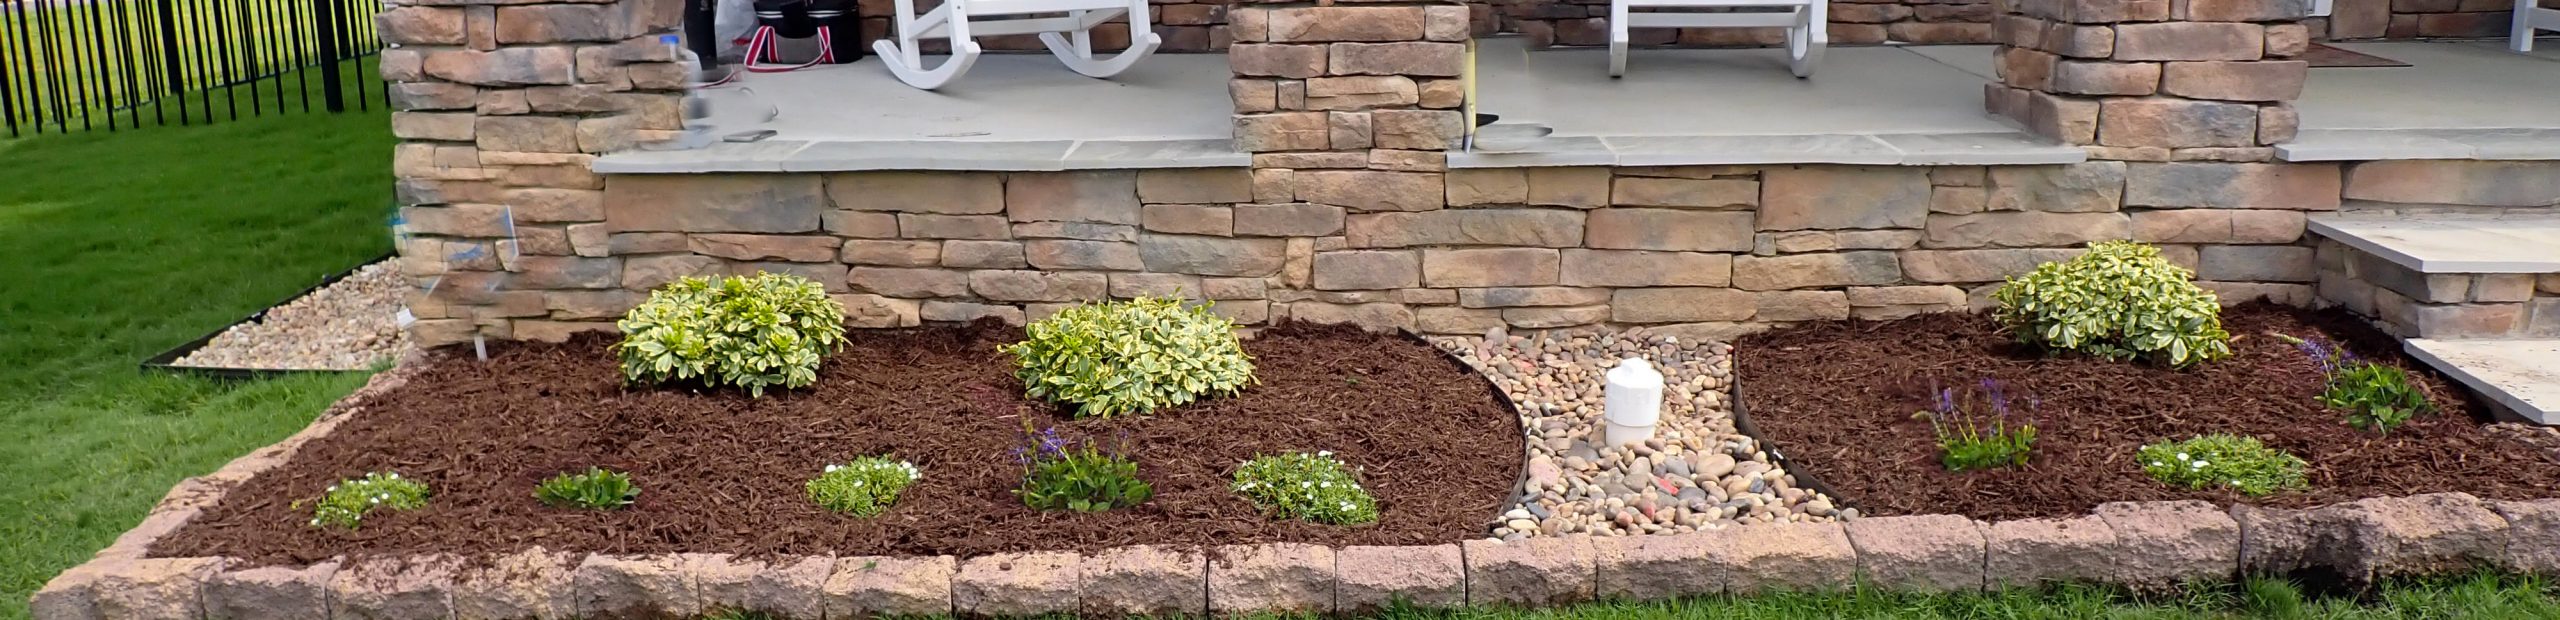 Landscaping Design and Installation in Virginia Beach